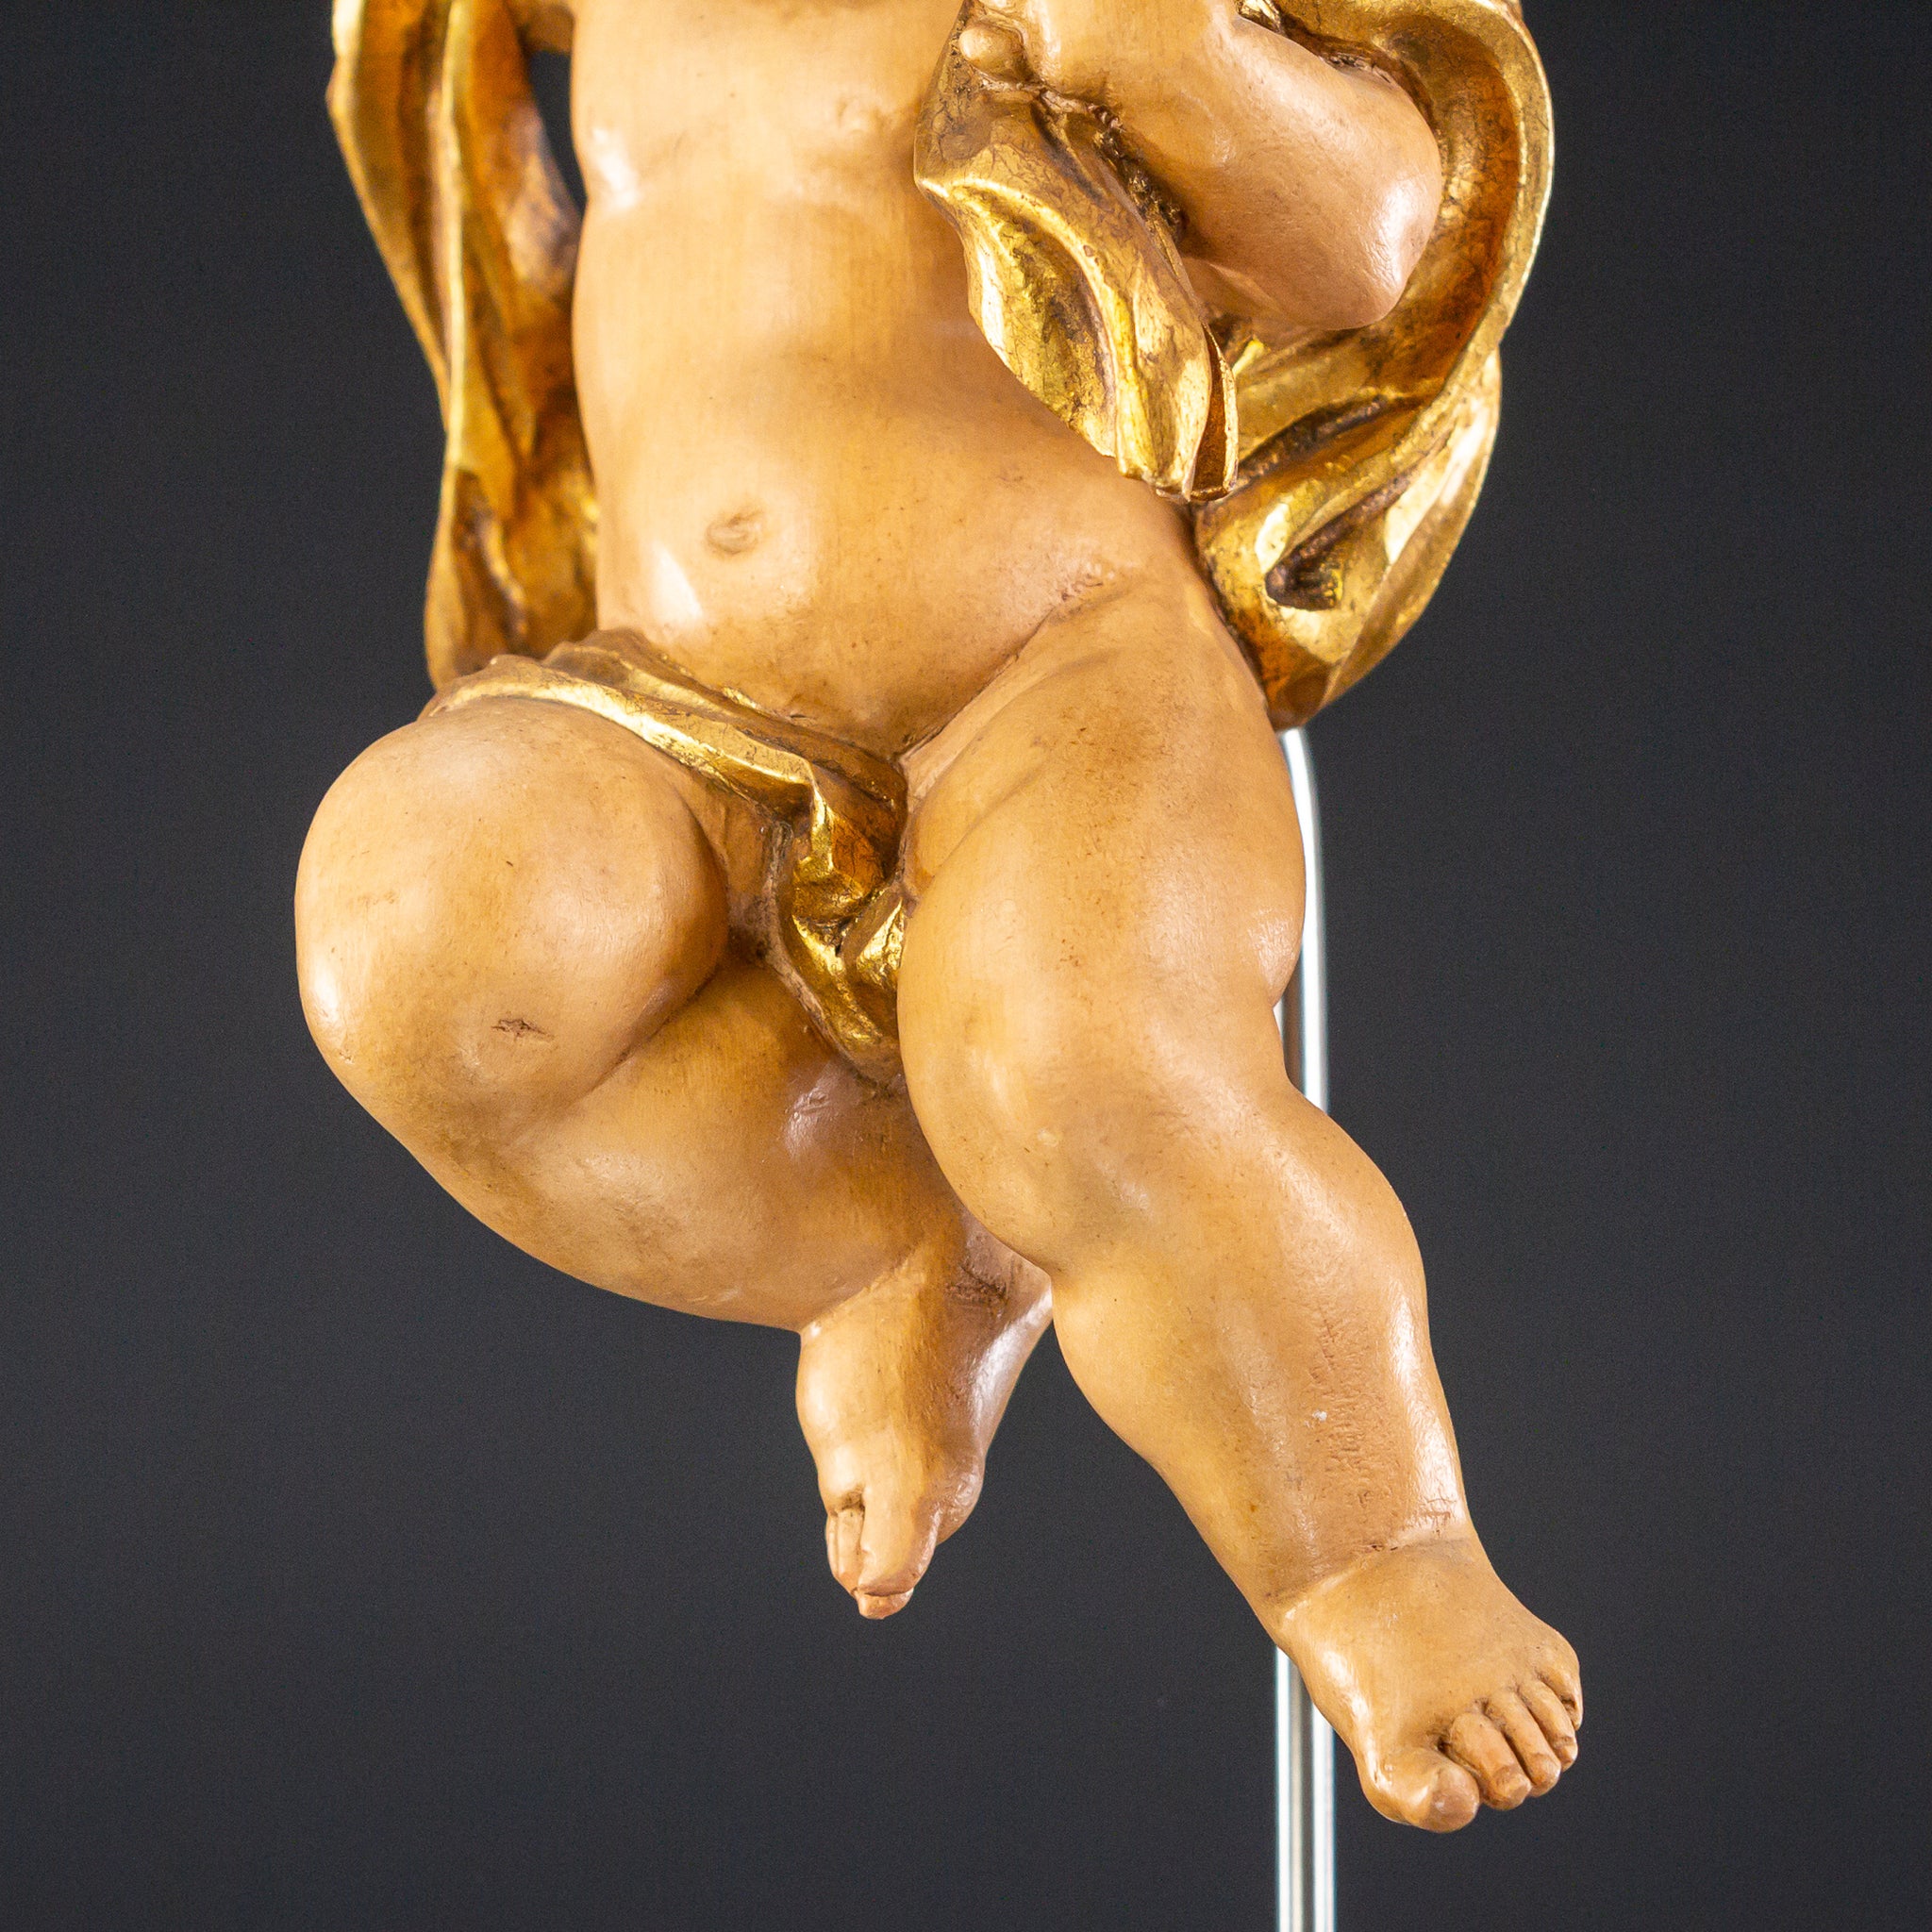 Angel Sculpture | Wood Carving Statue 10"